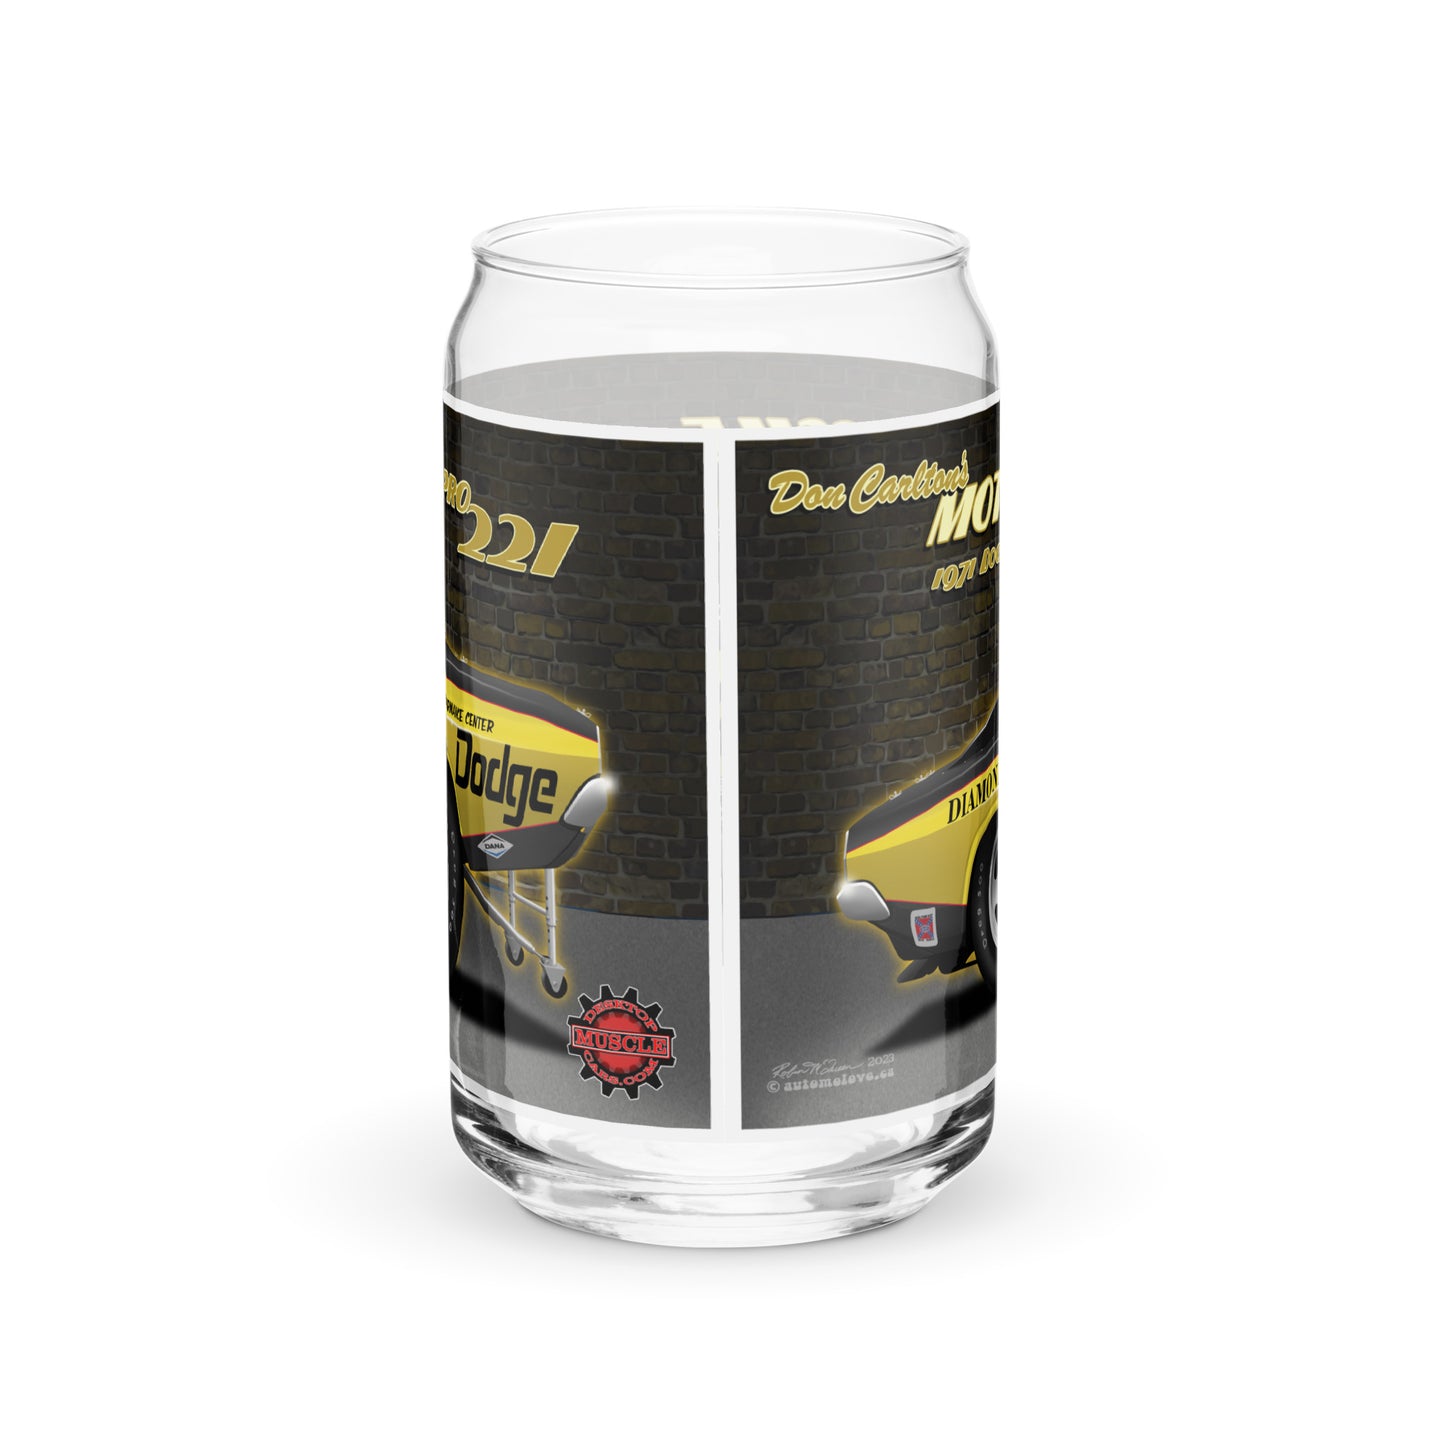 Motown Missile Challenger Can-shaped glass